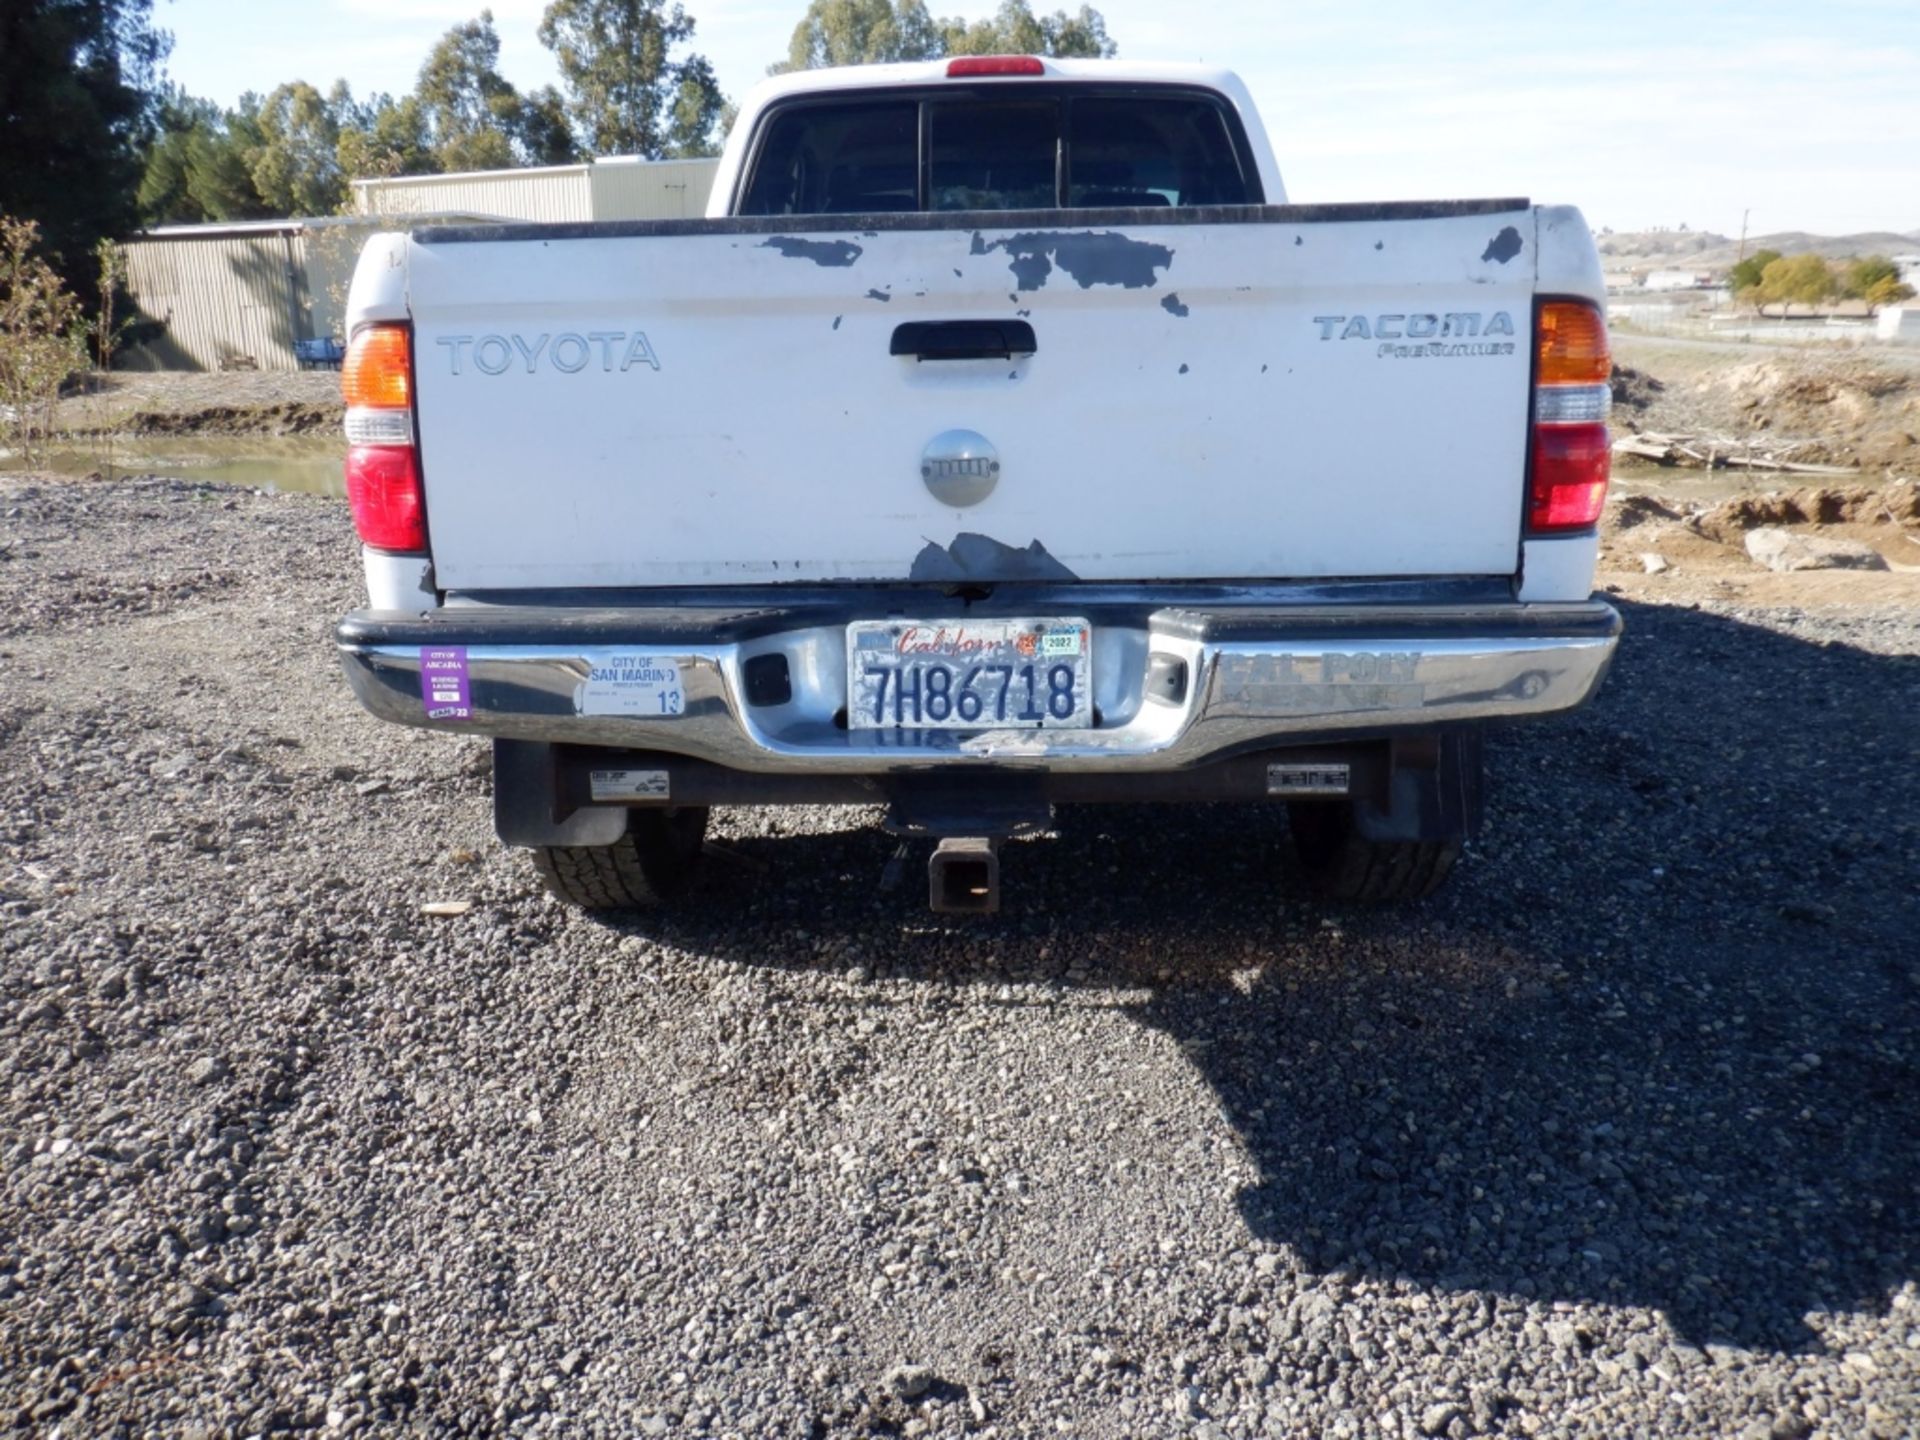 Toyota Tacoma TRD SR5 Extended Cab Pickup, - Image 48 of 52